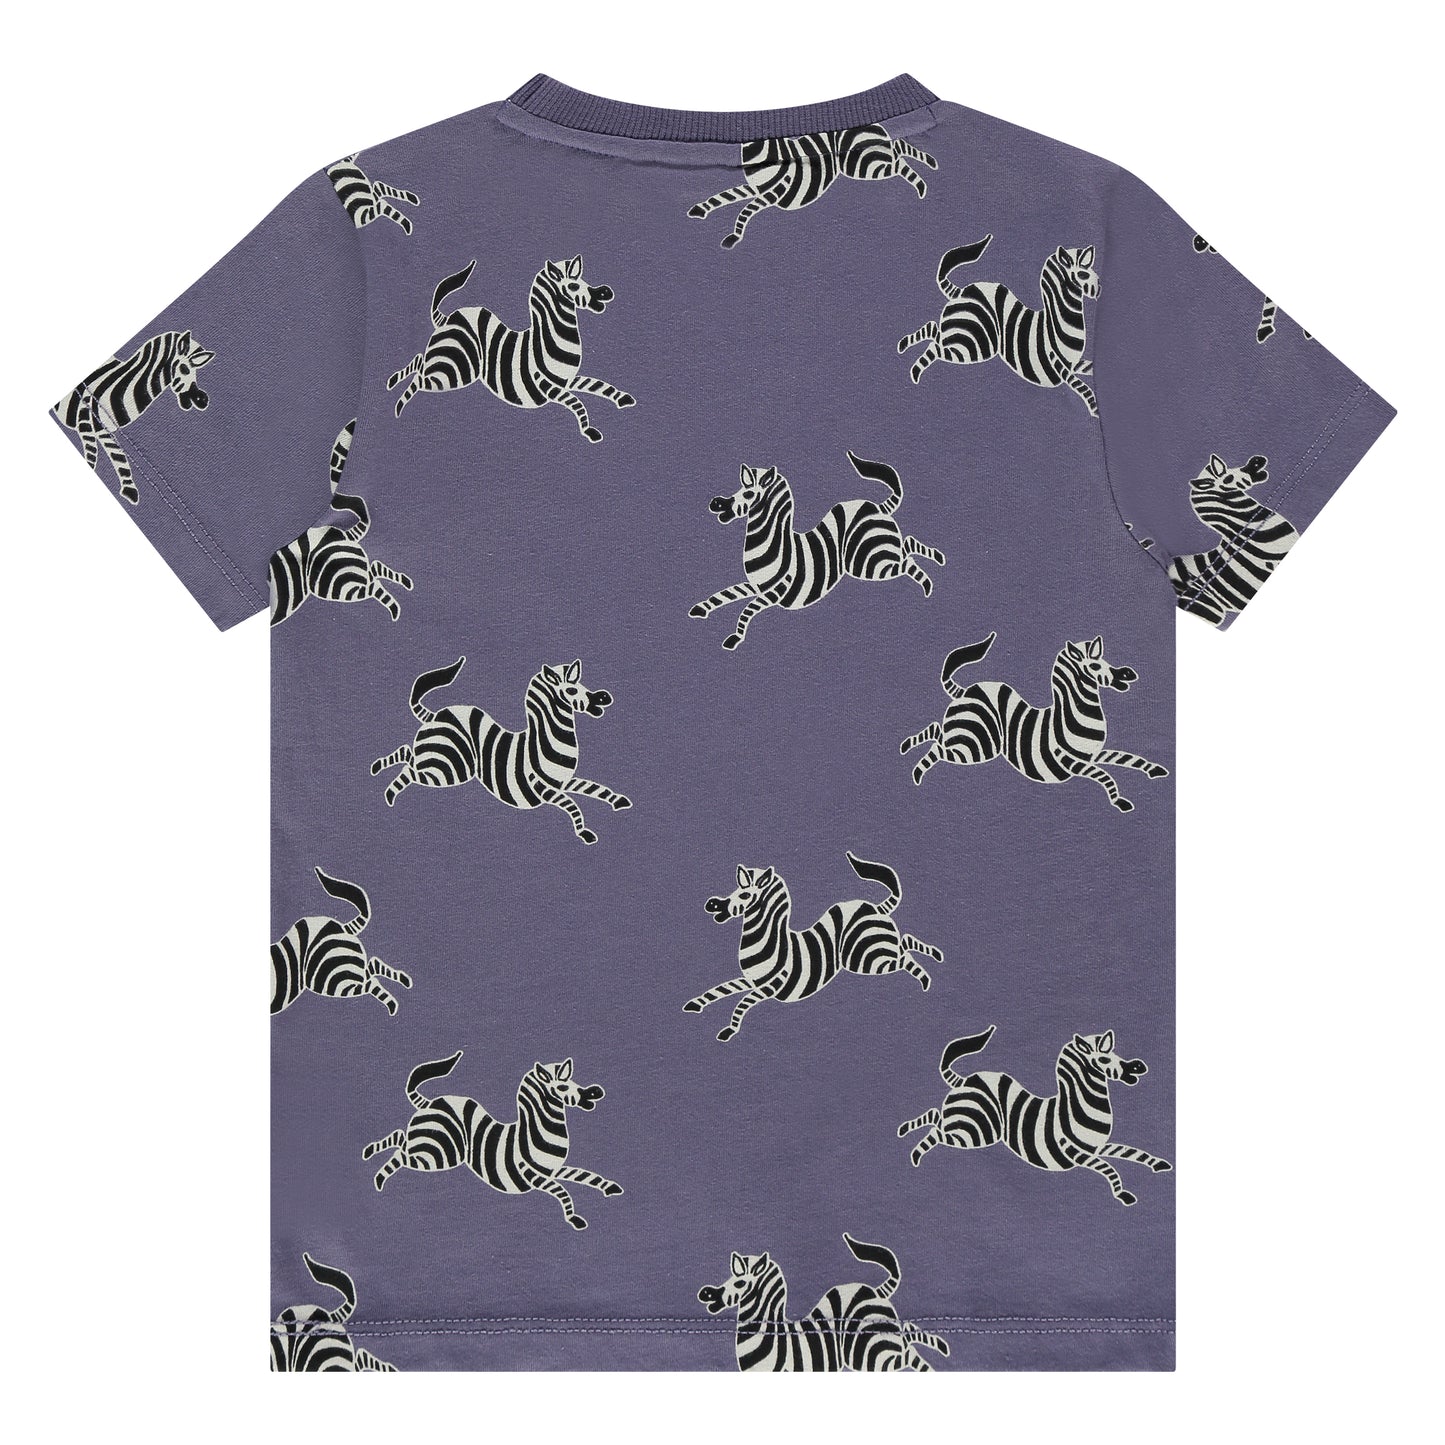 Stains & Stories T-Shirt - Grape